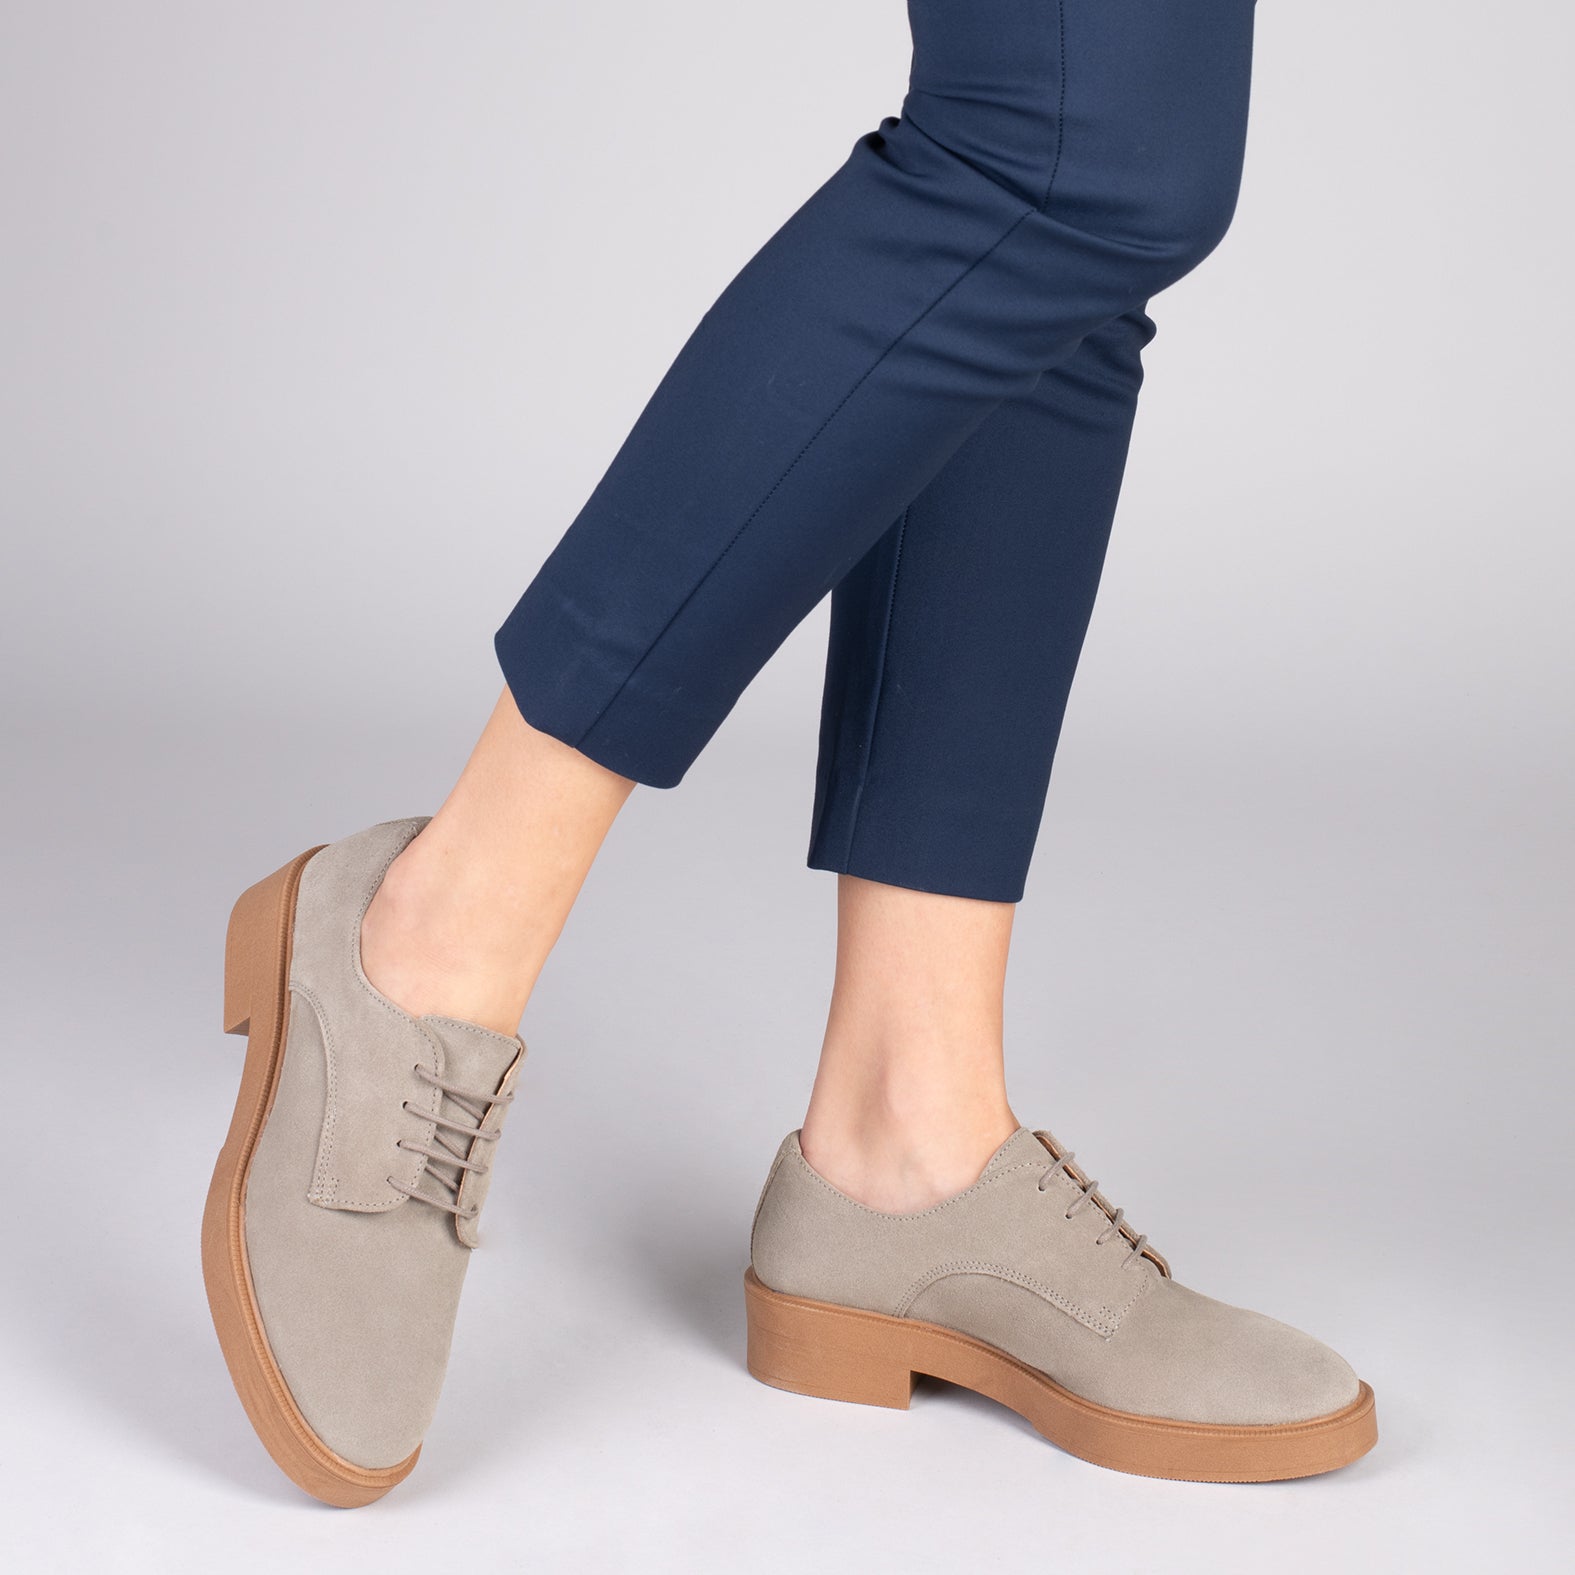 BLUCHER – GREY classic flats with laces